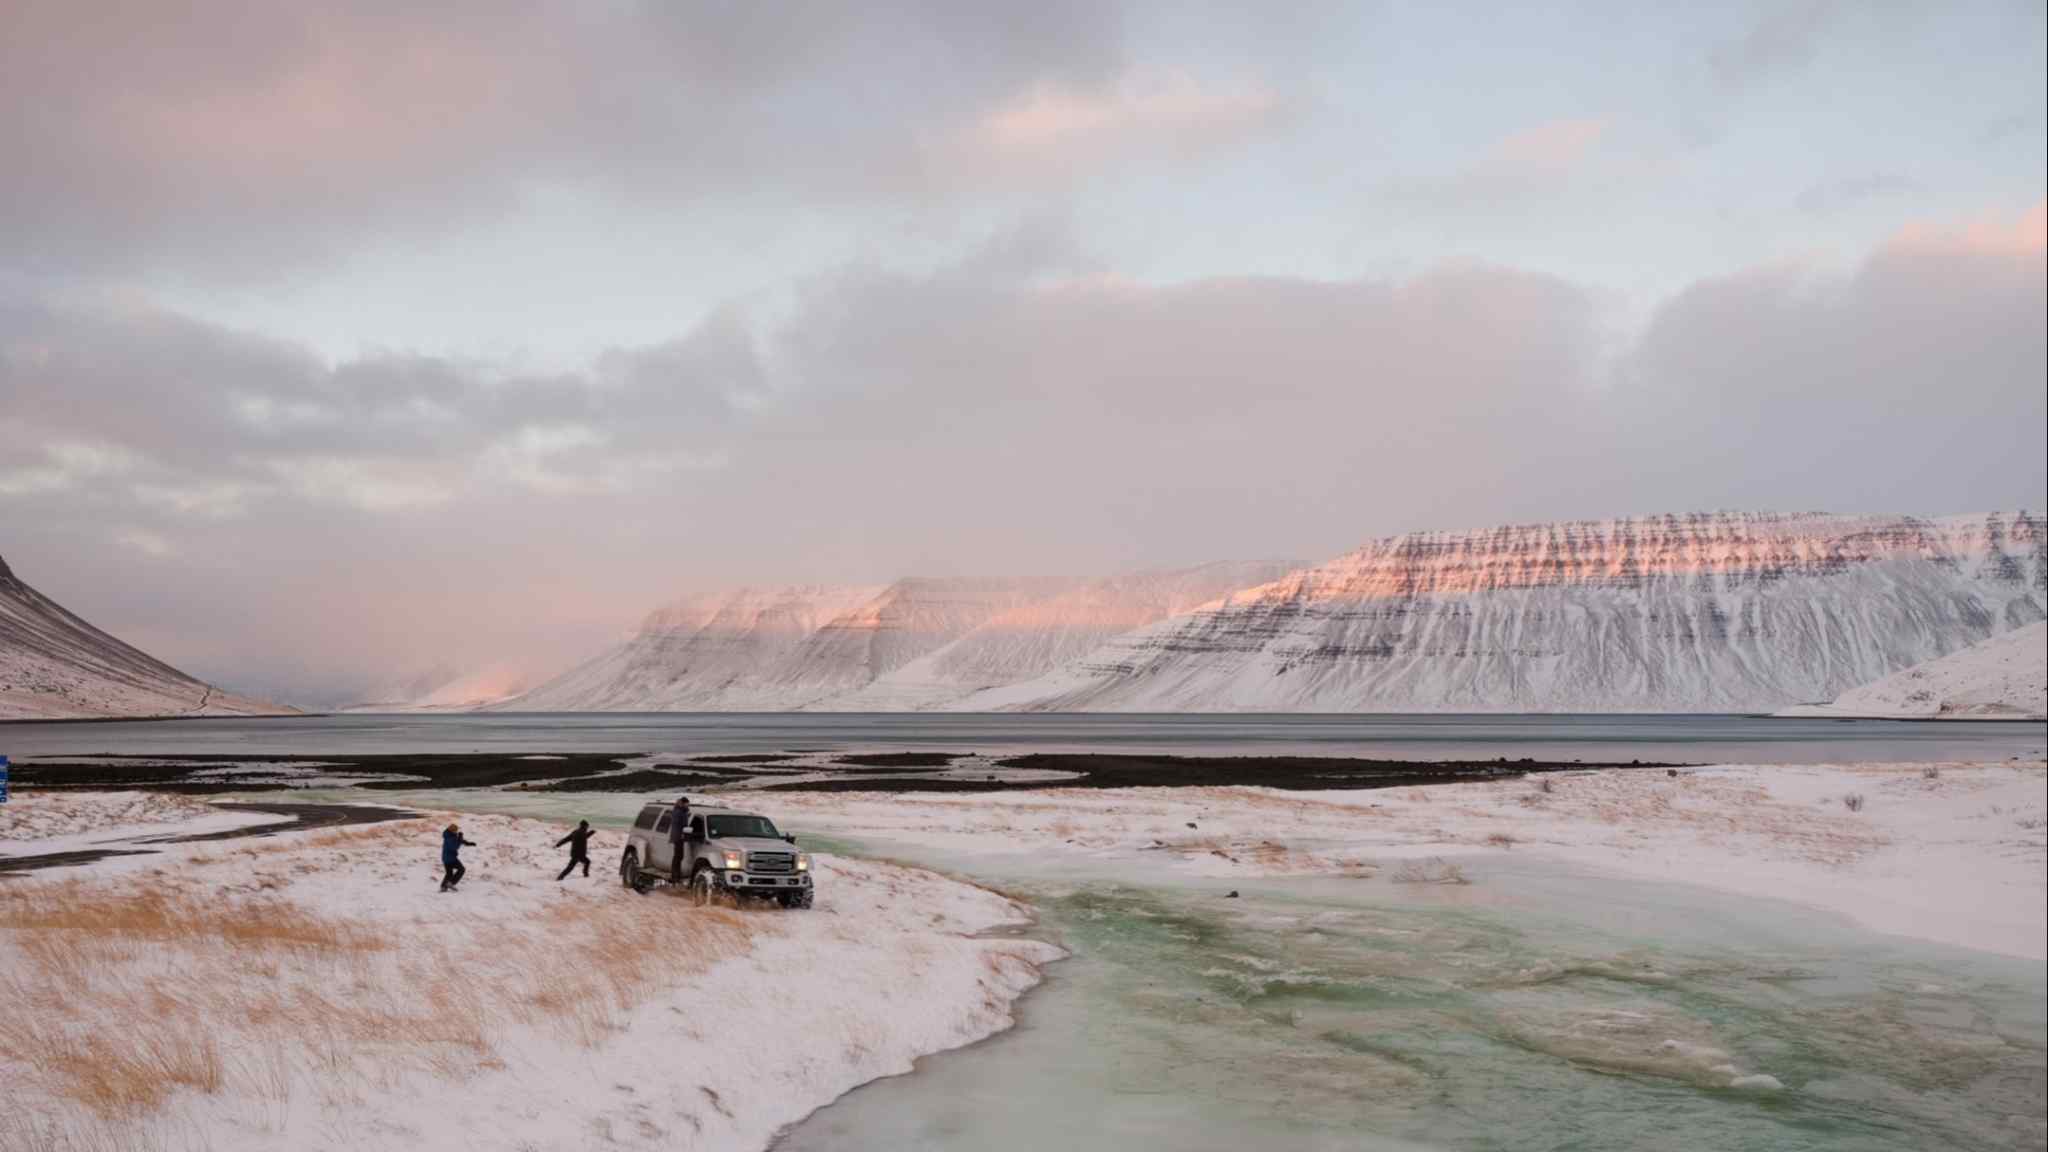 Across Iceland, in the footsteps of WH Auden